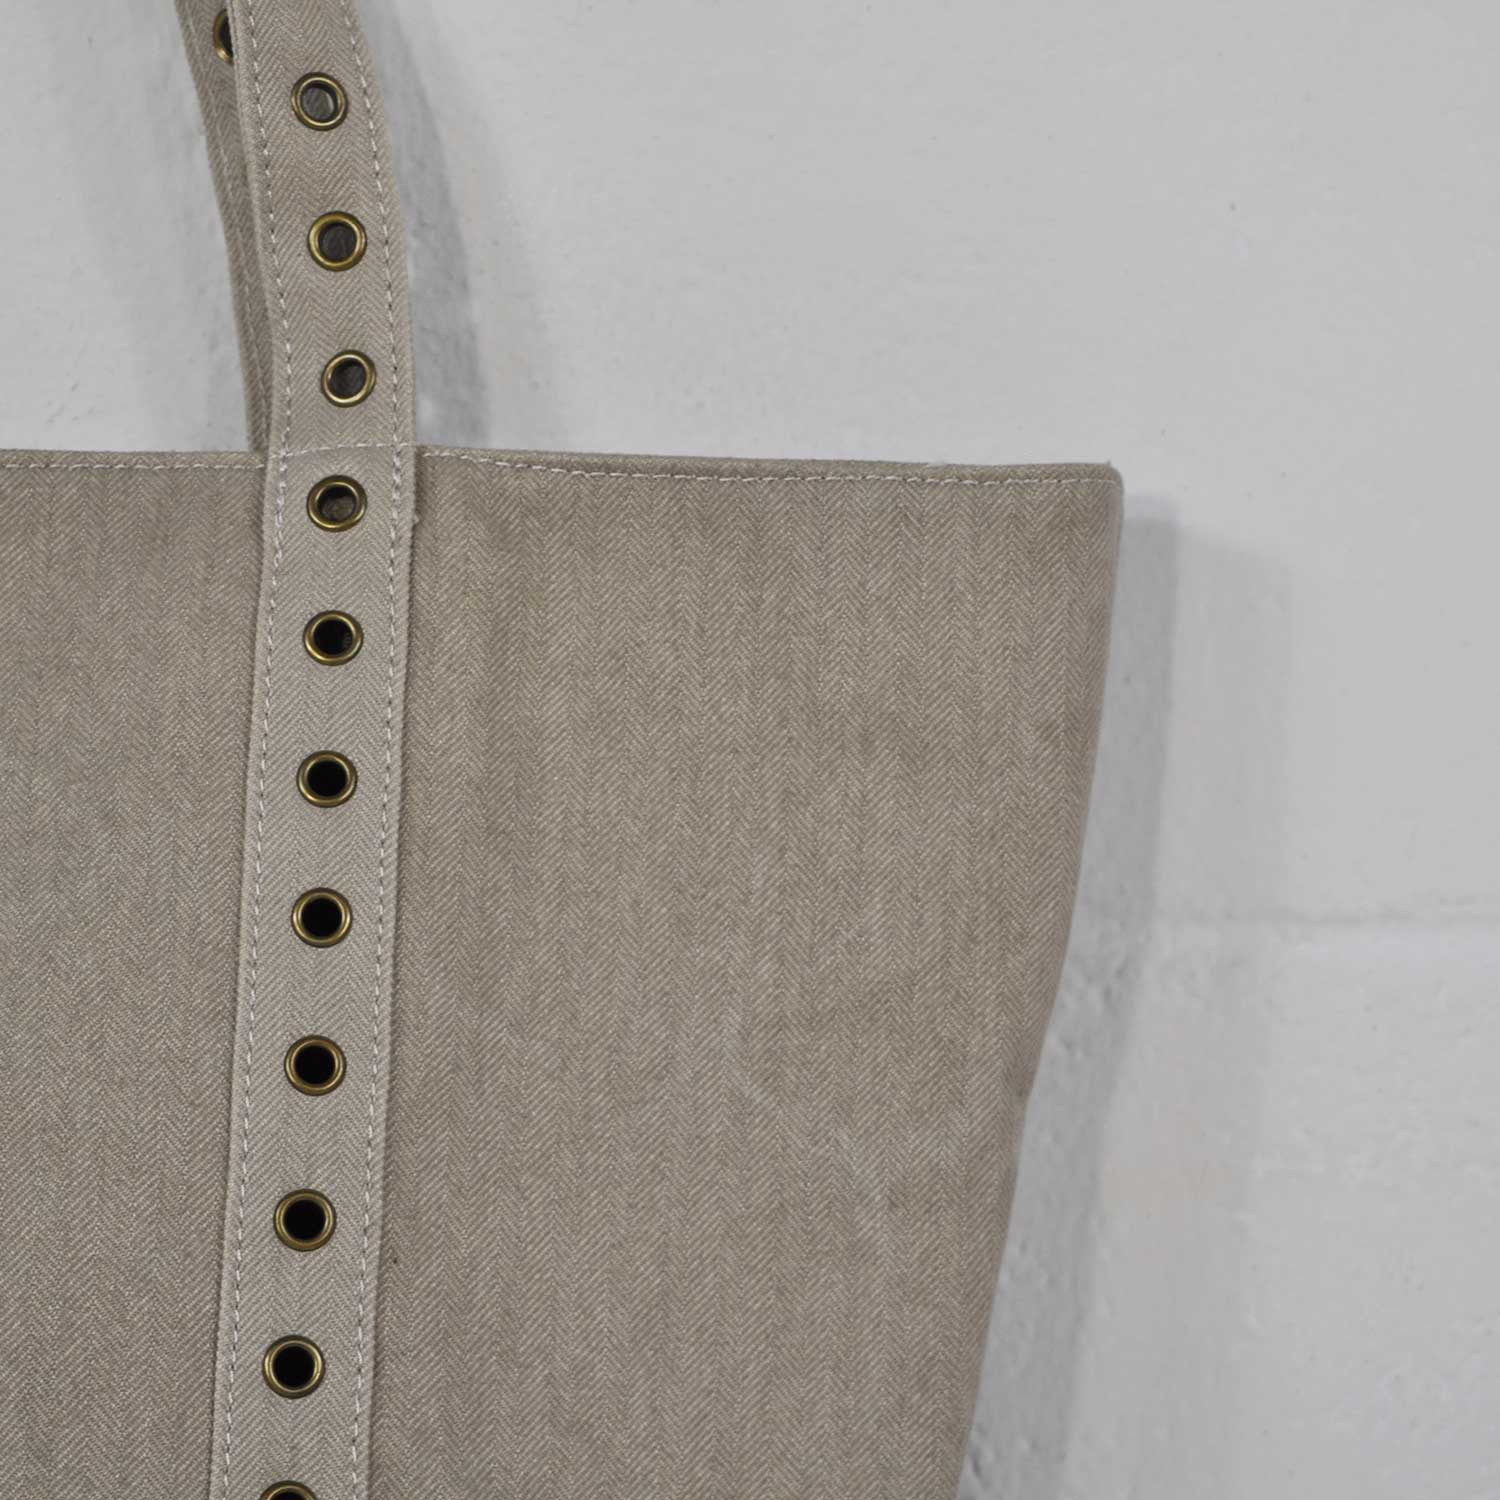 Canvas bag with studs